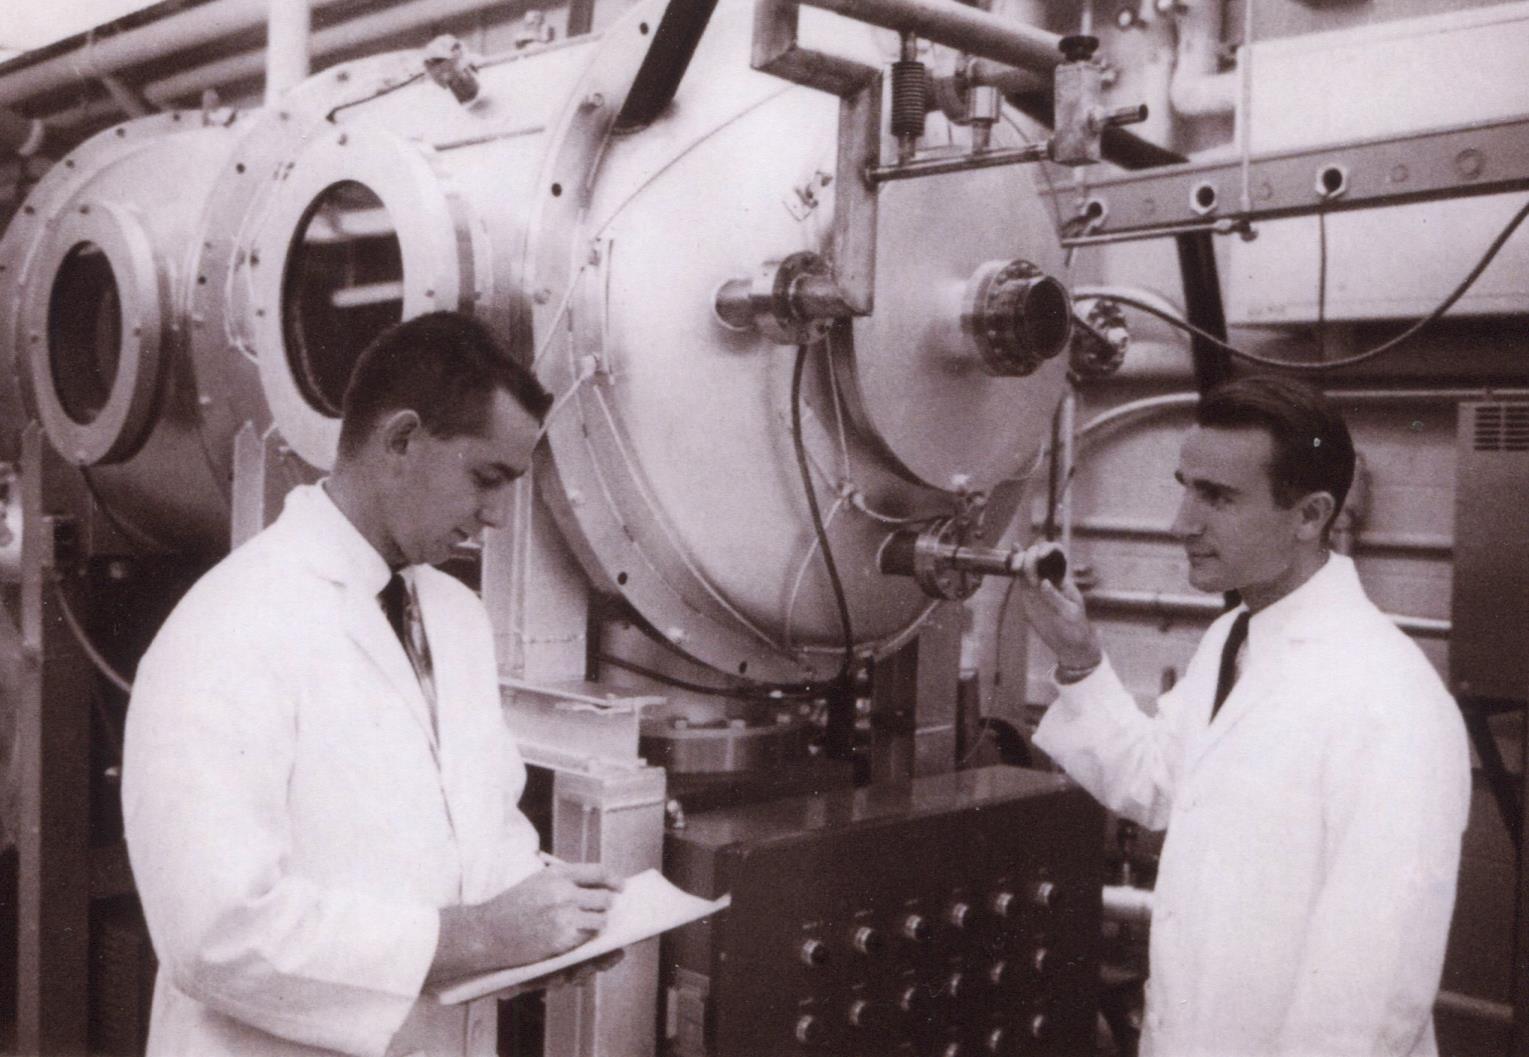 Two gentlemen in white lab coats stand next to a metal capsule with windows in a lab in this 60s era black and white photo.